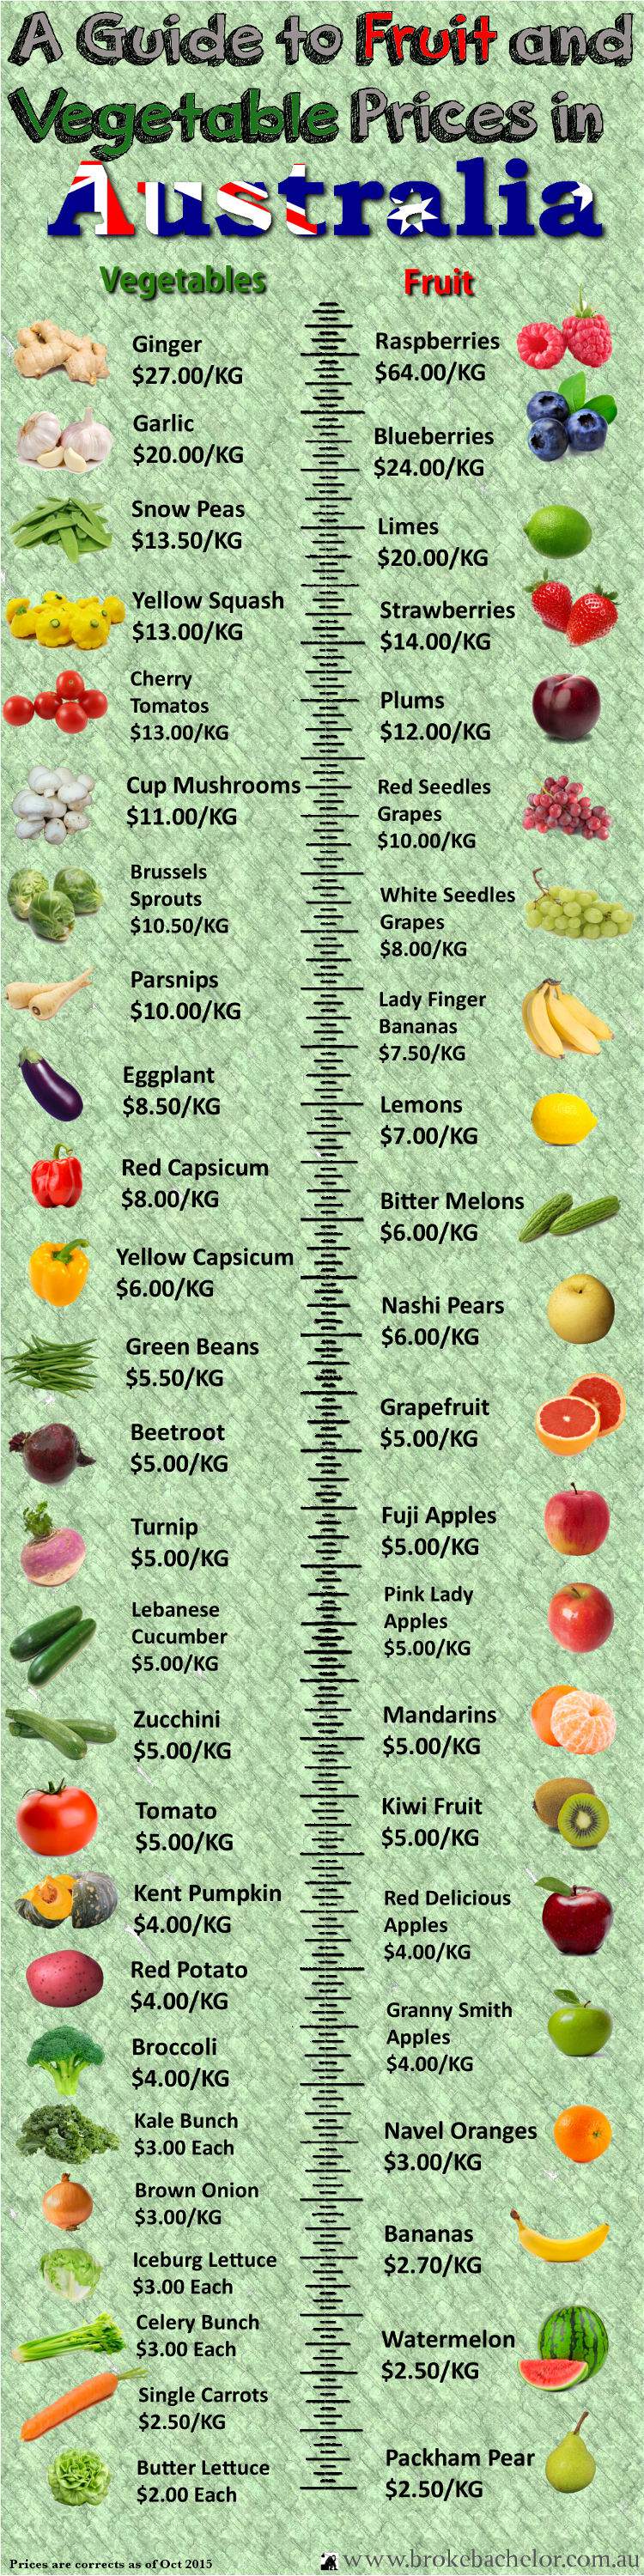 Fruits and Vegetable Prices in Australia